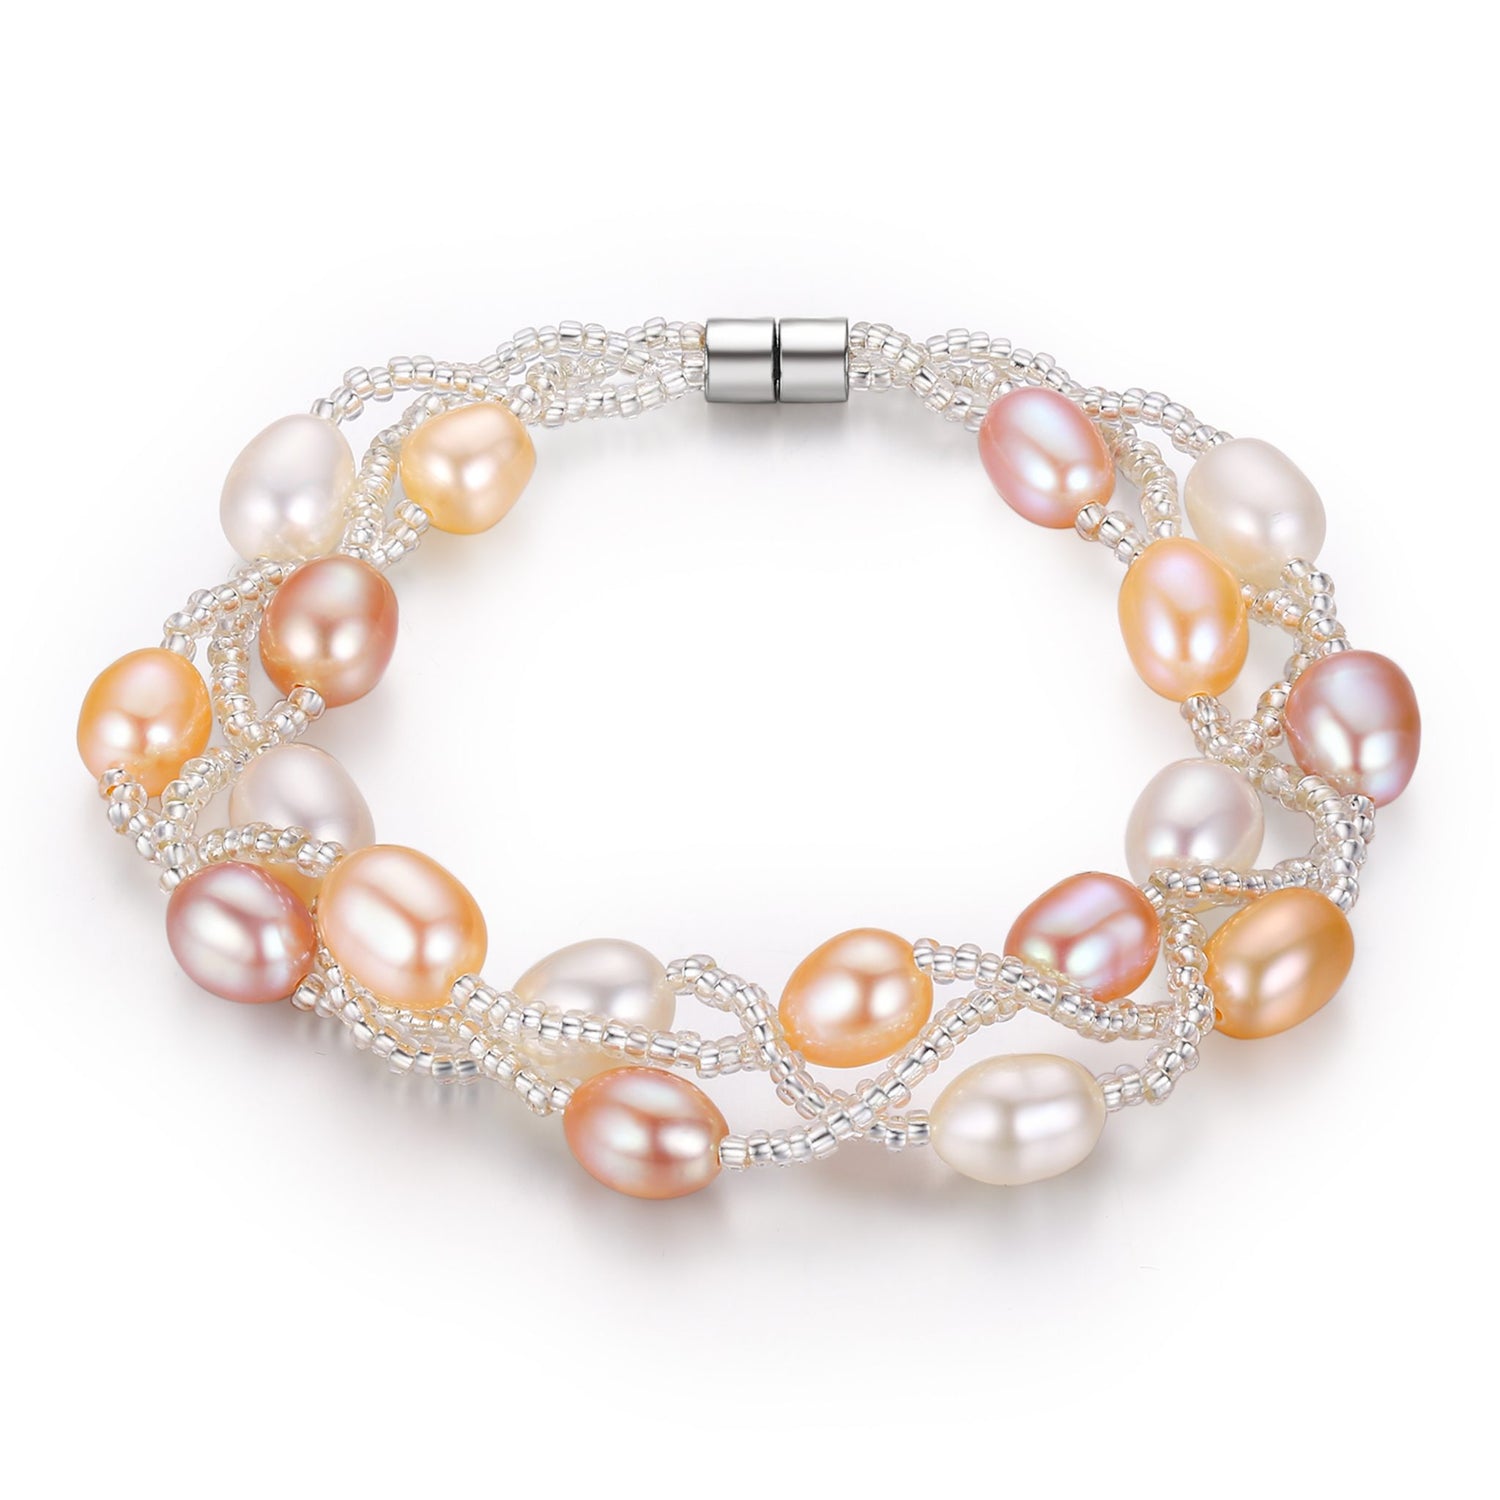 COLORFUL PEARLS BRACELET - Timeless Pearl